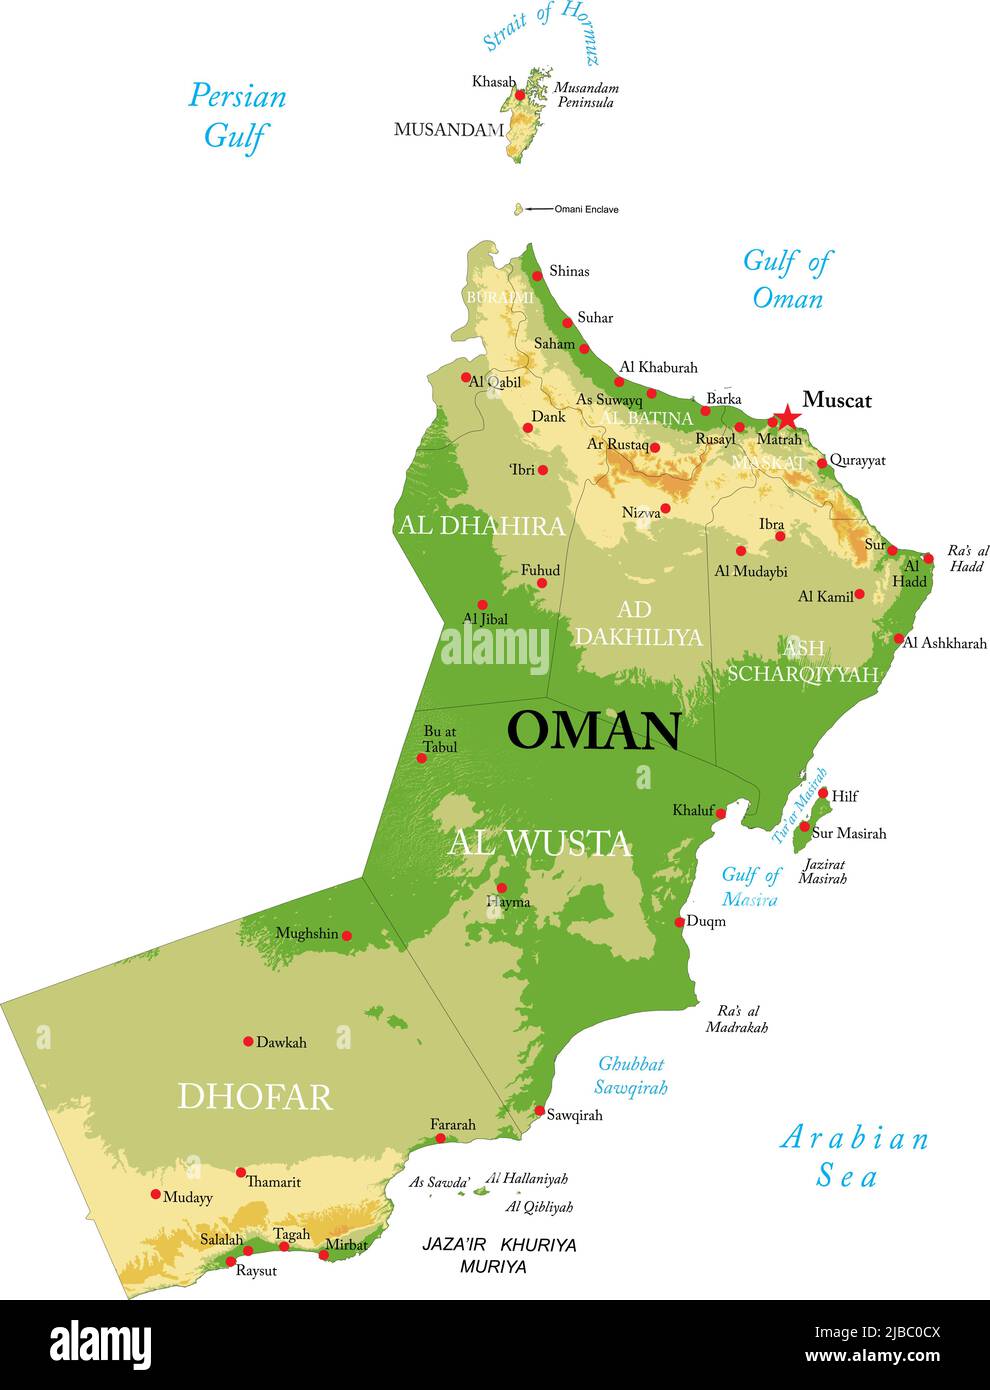 Highly Detailed Physical Map Of Oman In Vector Formatwith All The Relief Formsregions And Big Cities 2JBC0CX 